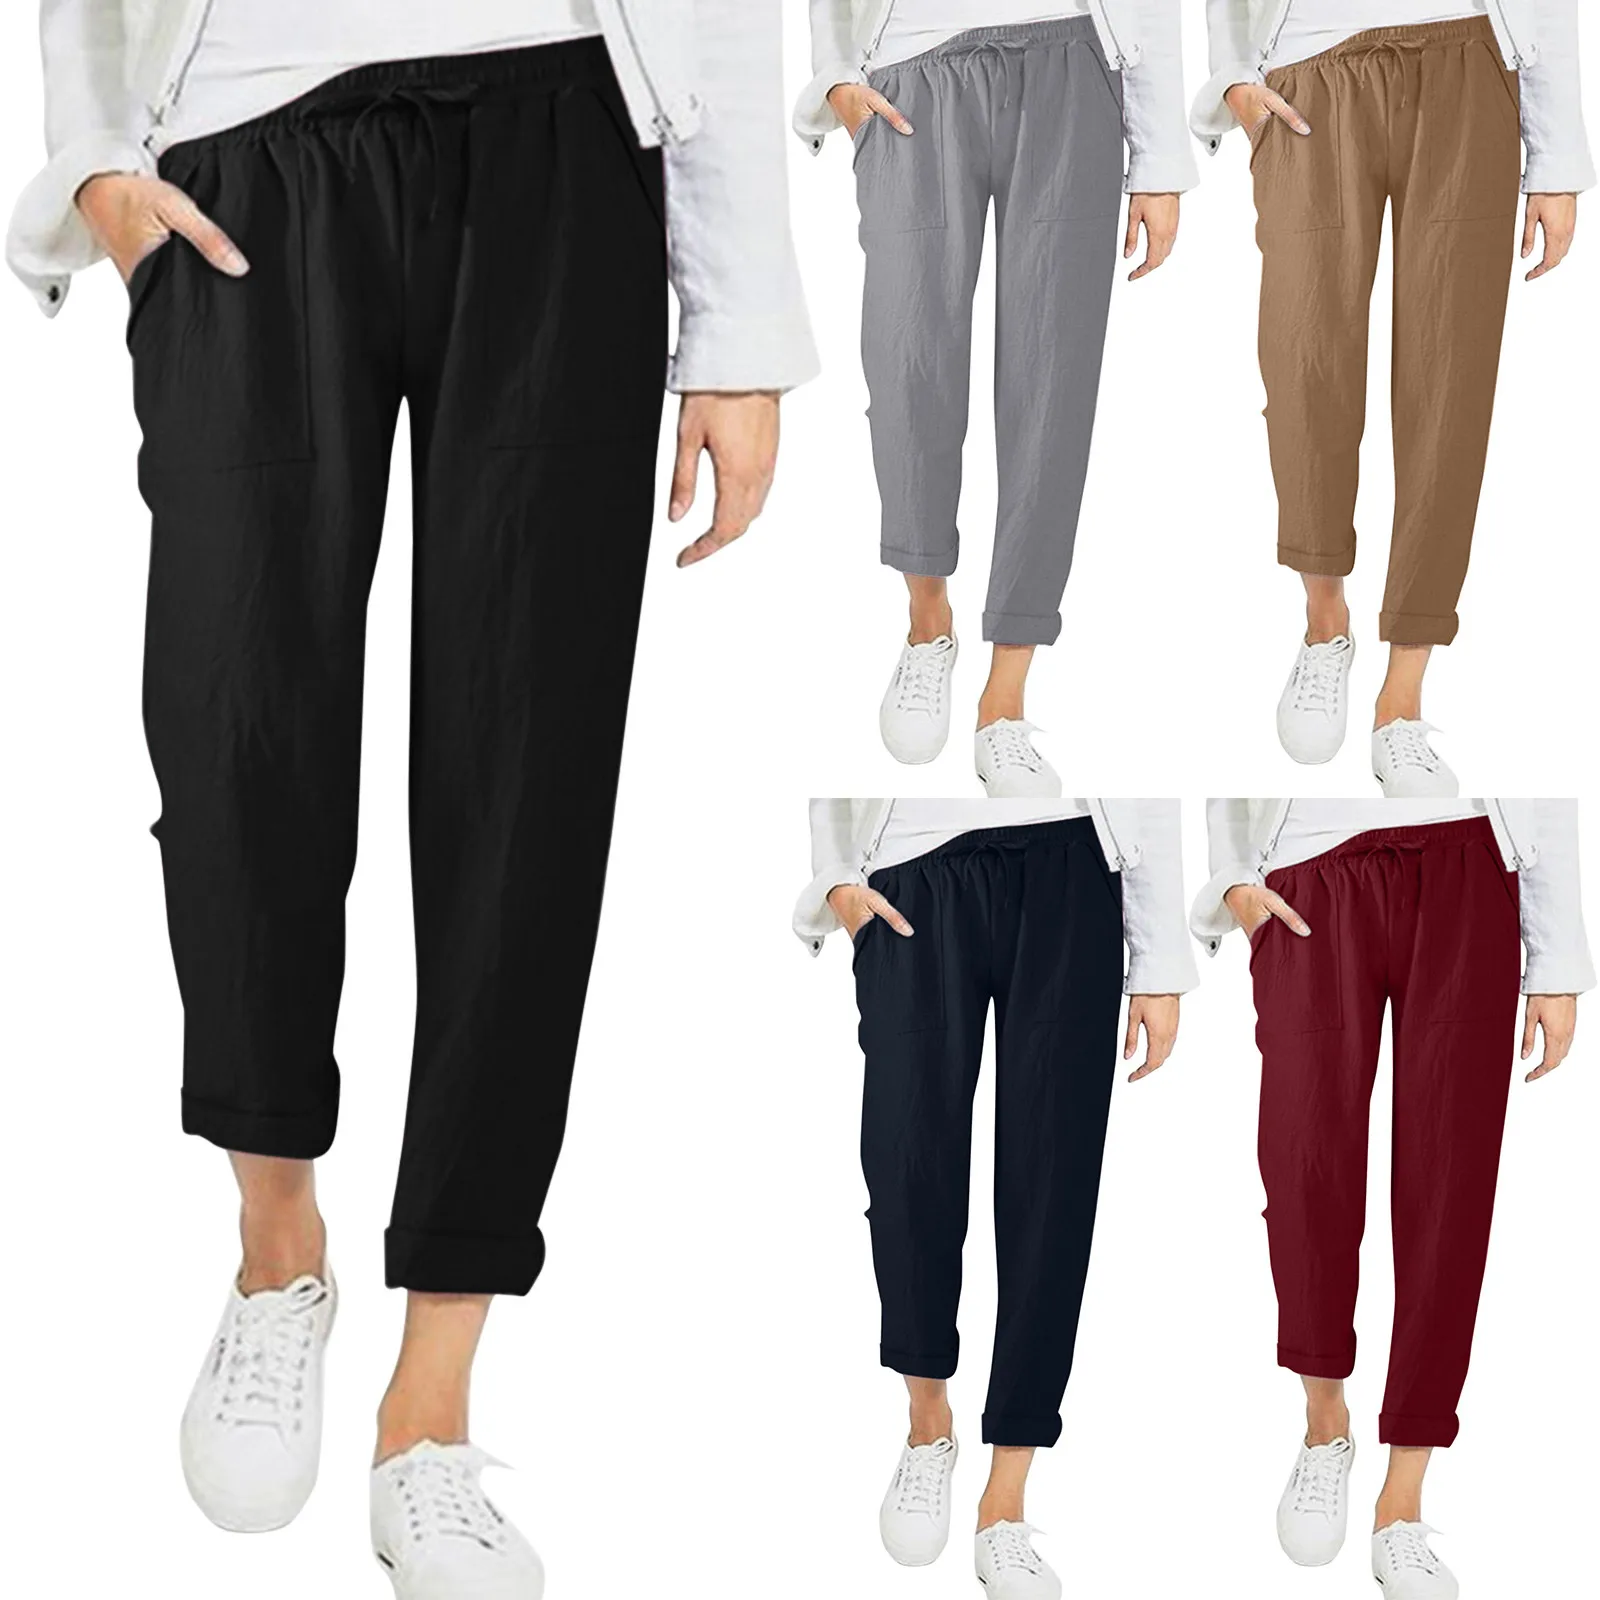 Cotton Linen Pants Women Casual Spring Summer High Waist Elastic Ankle-Length Pants Female Solid Pockets Harem Trousers 2024 butterfly printing female jeans new spring summer all match high waist denim harem pants ankle length slim casual jeans